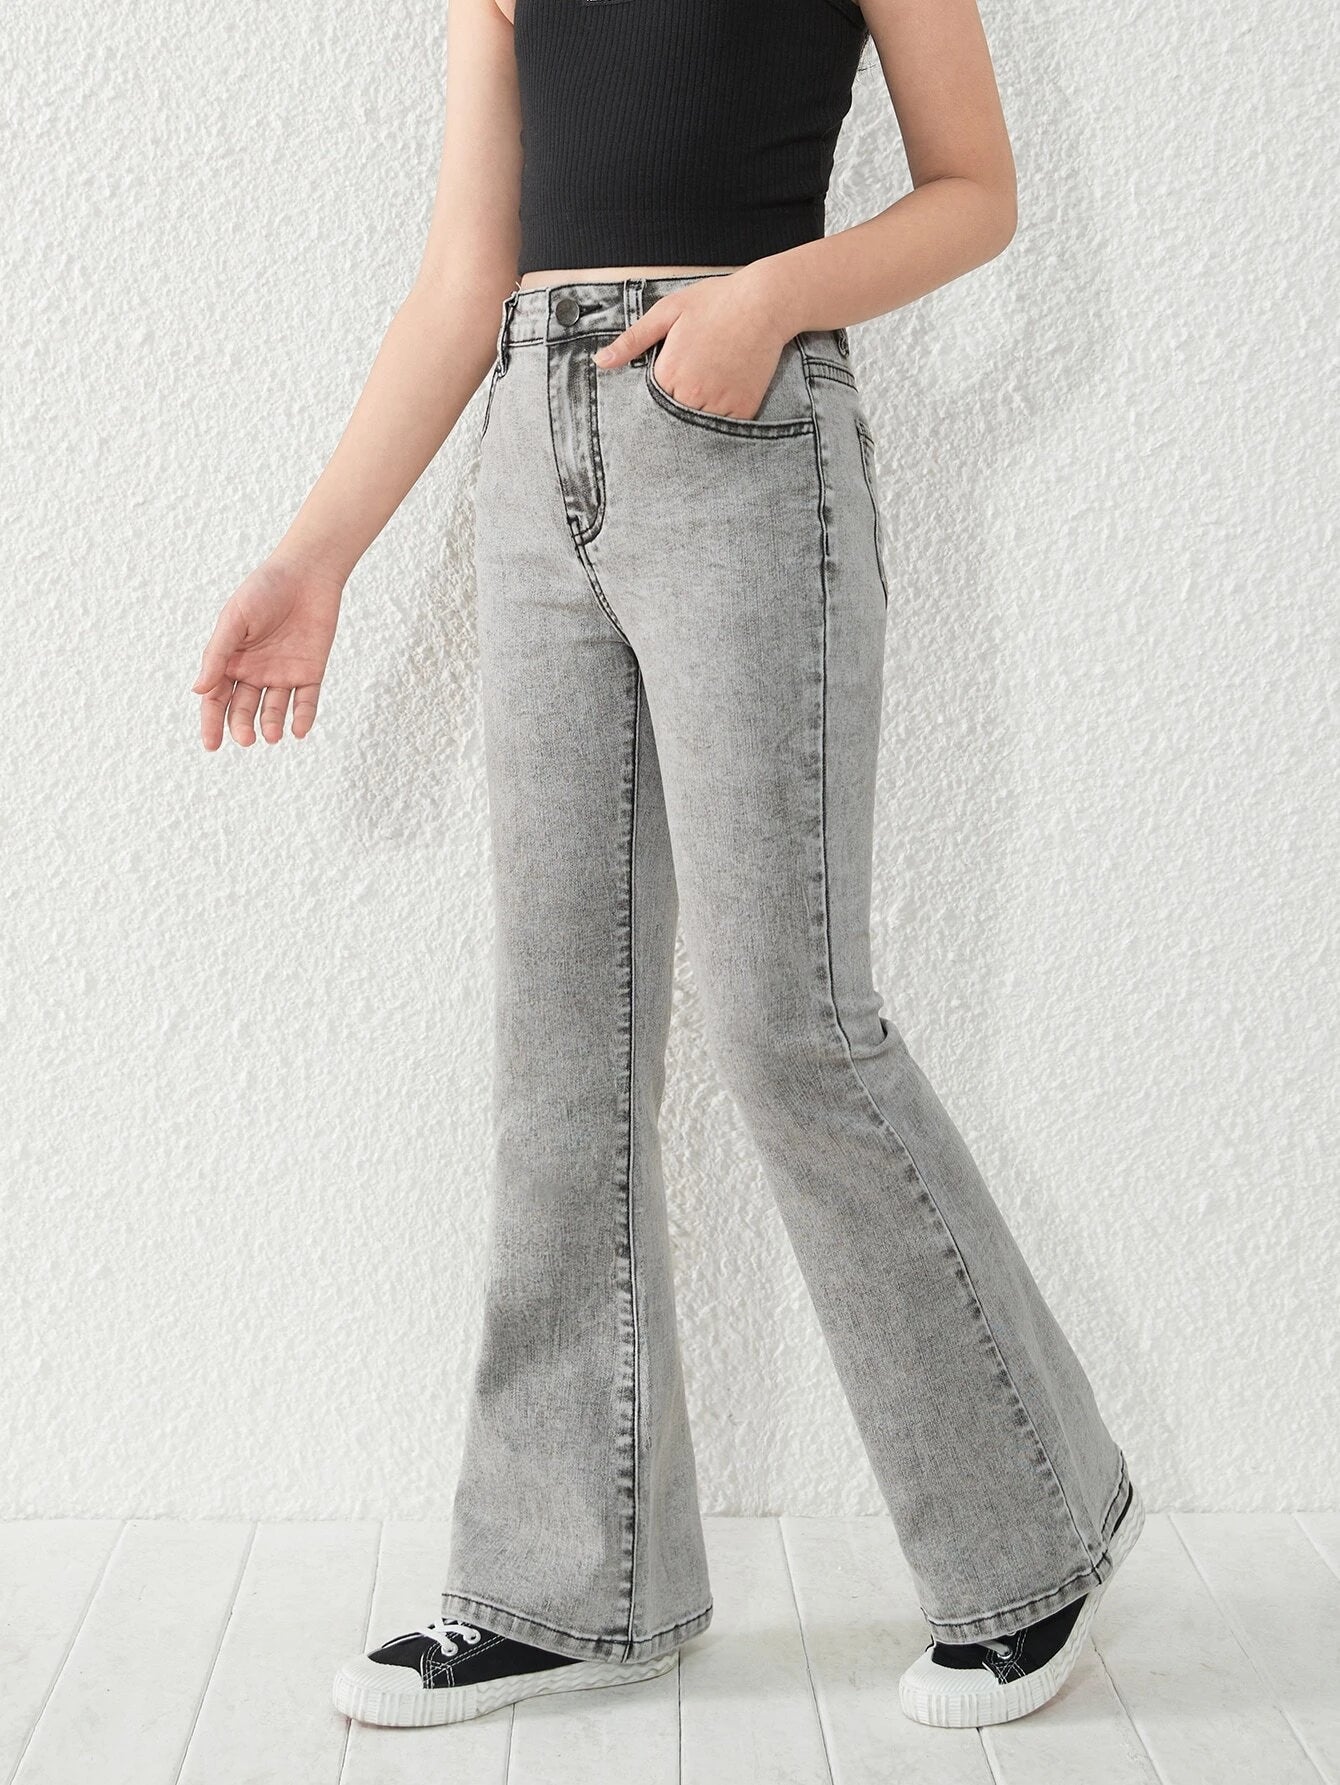 Girls Solid Flare Leg Jeans